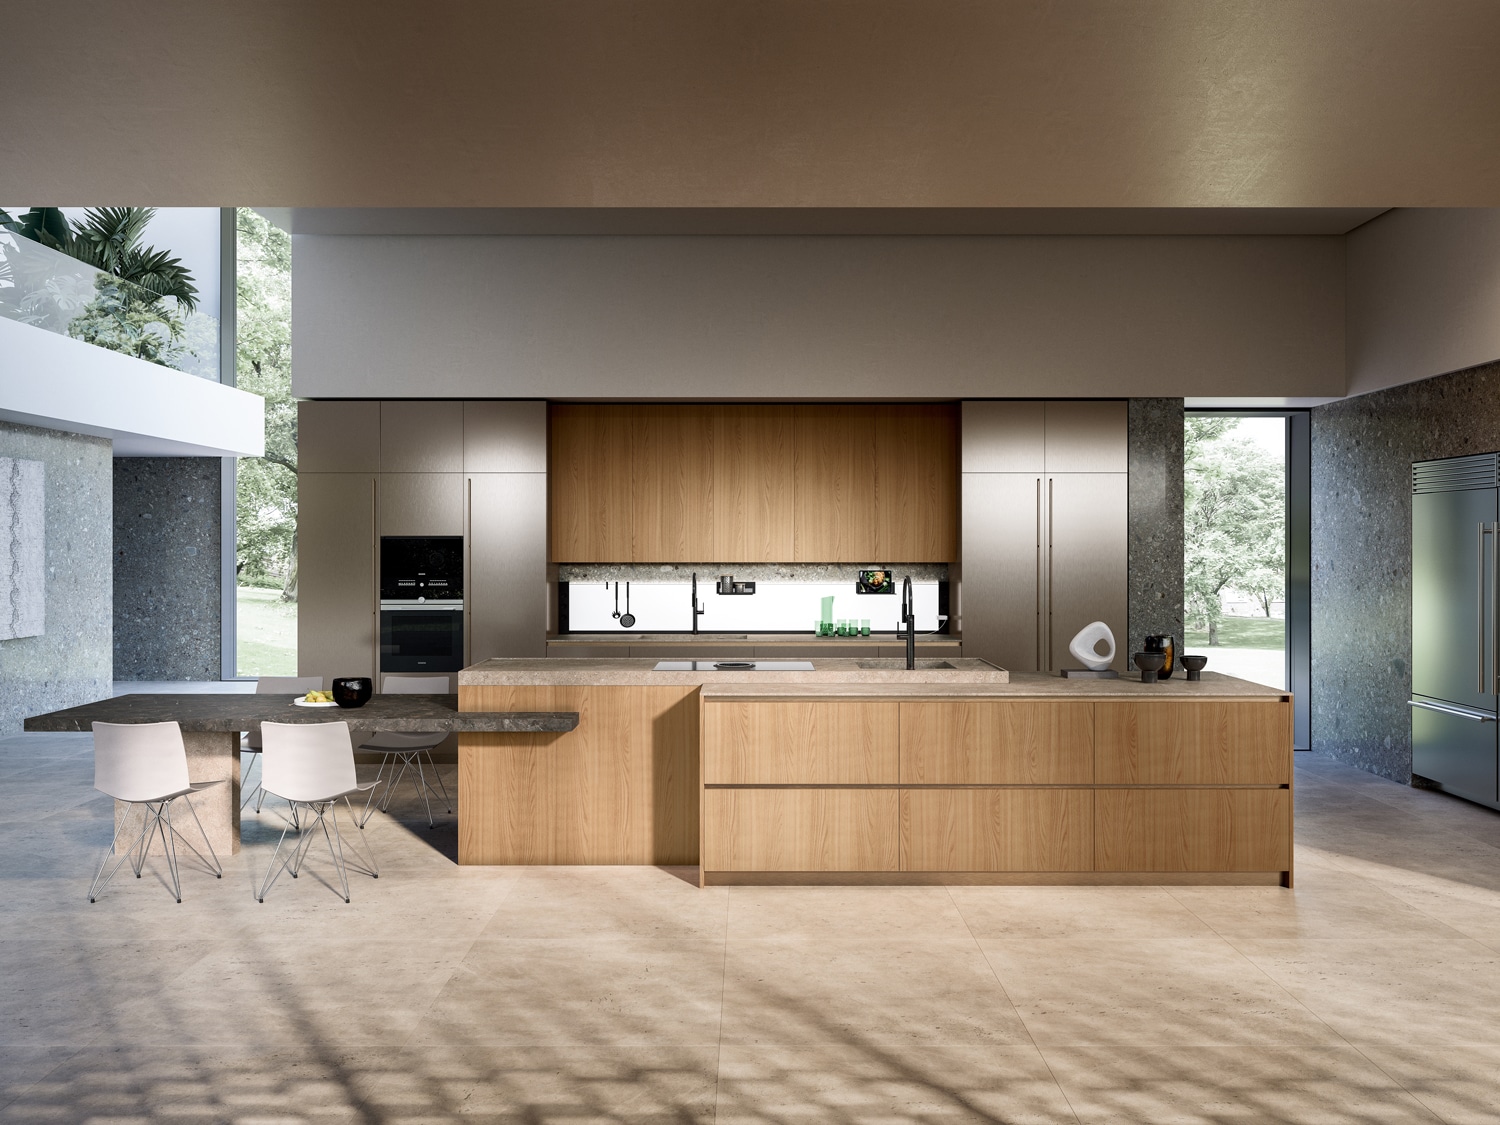 Modern kitchen designs with innovative finishes